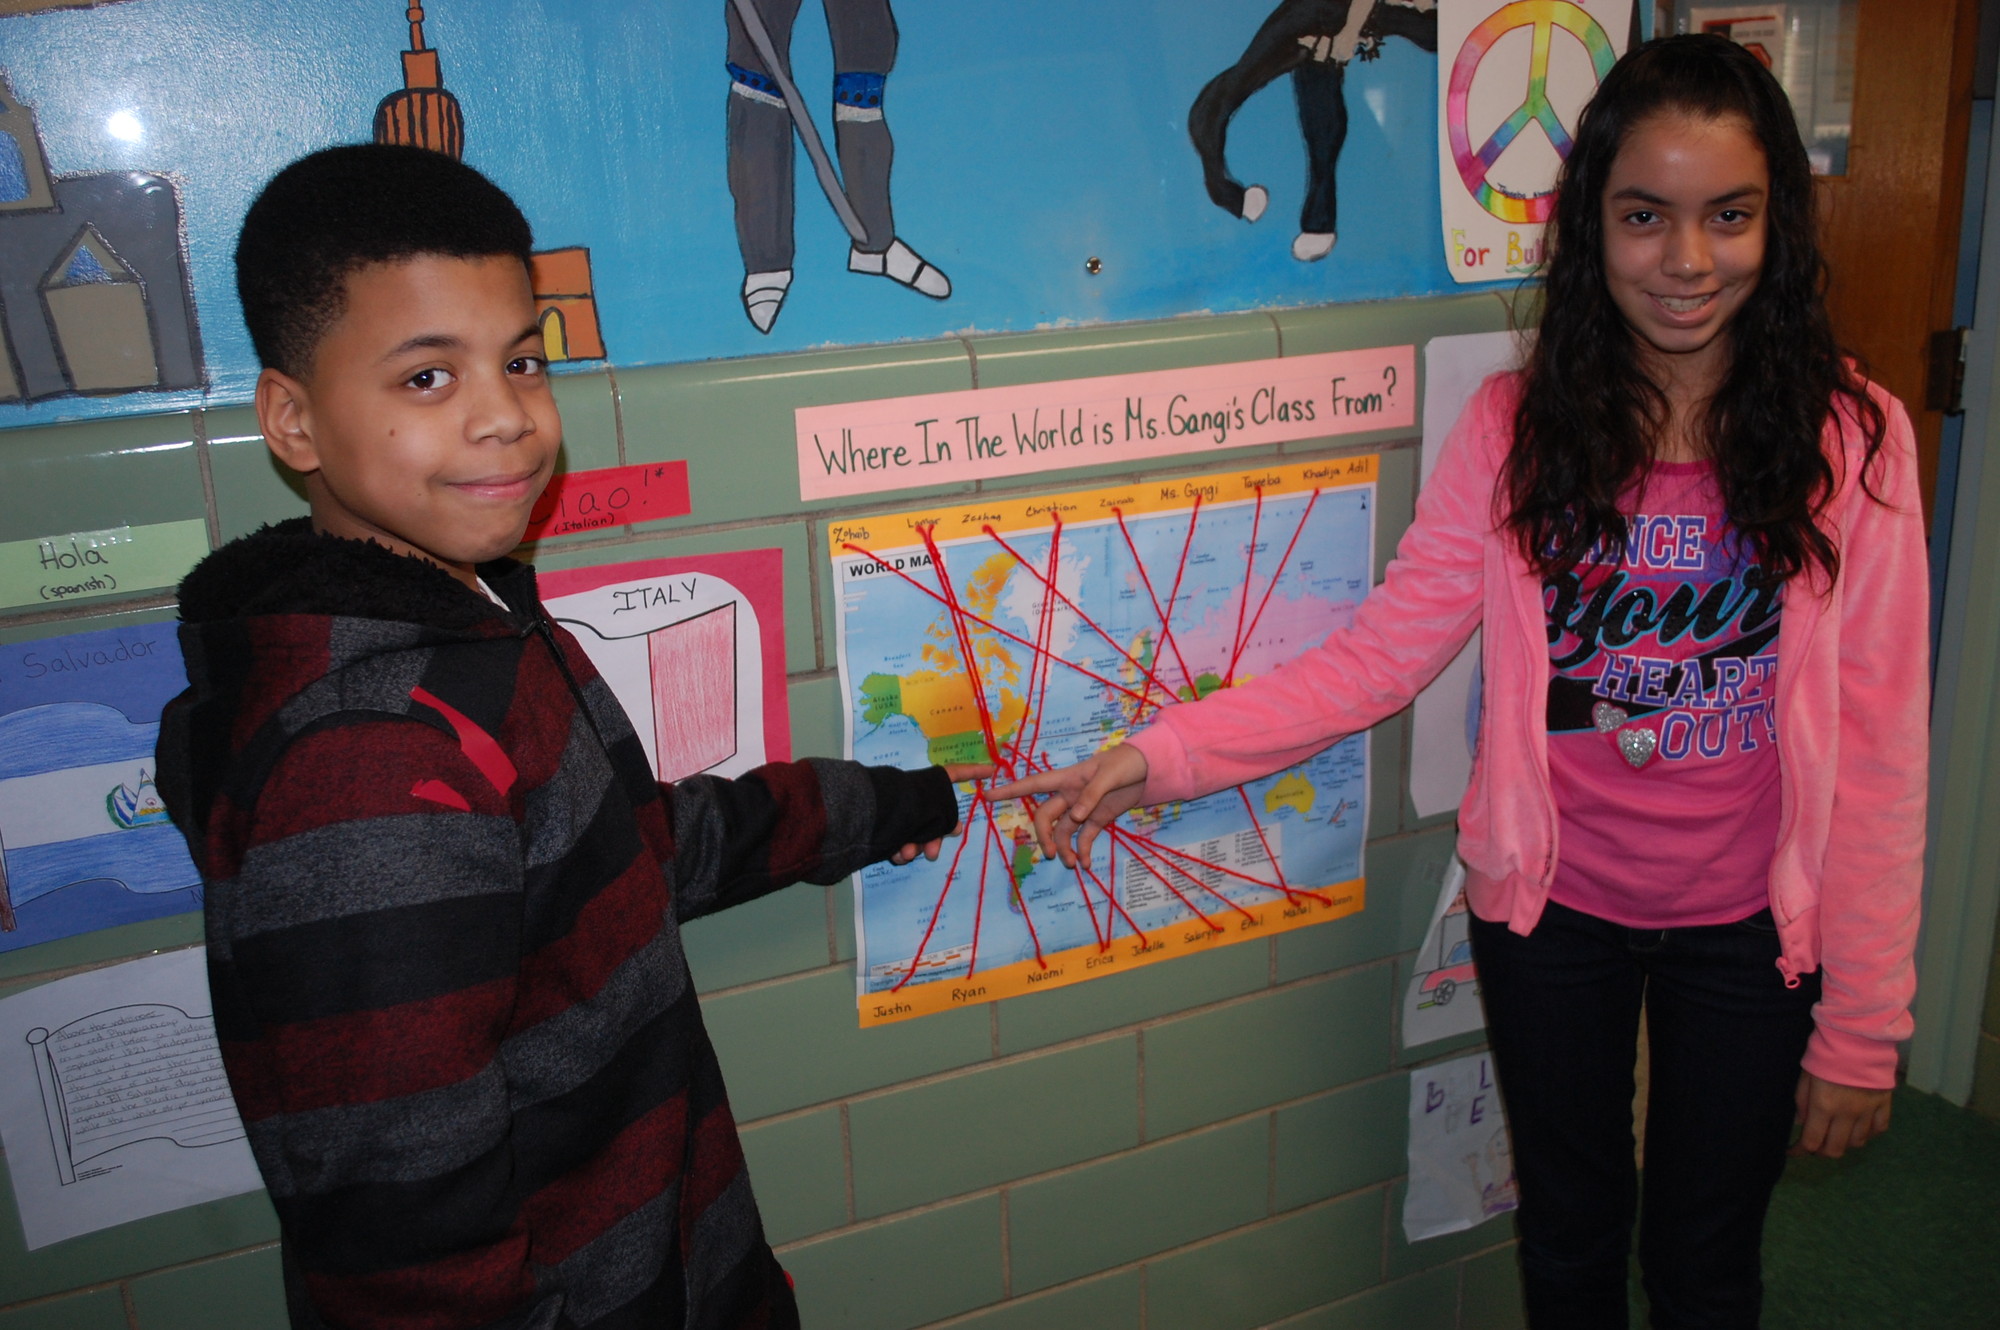 Ryan Pean, whose family hails from Haiti and Puerto Rico, and Naomi Candelario, of El Salvadorian heritage, noted the diversity of their sixth-grade class.